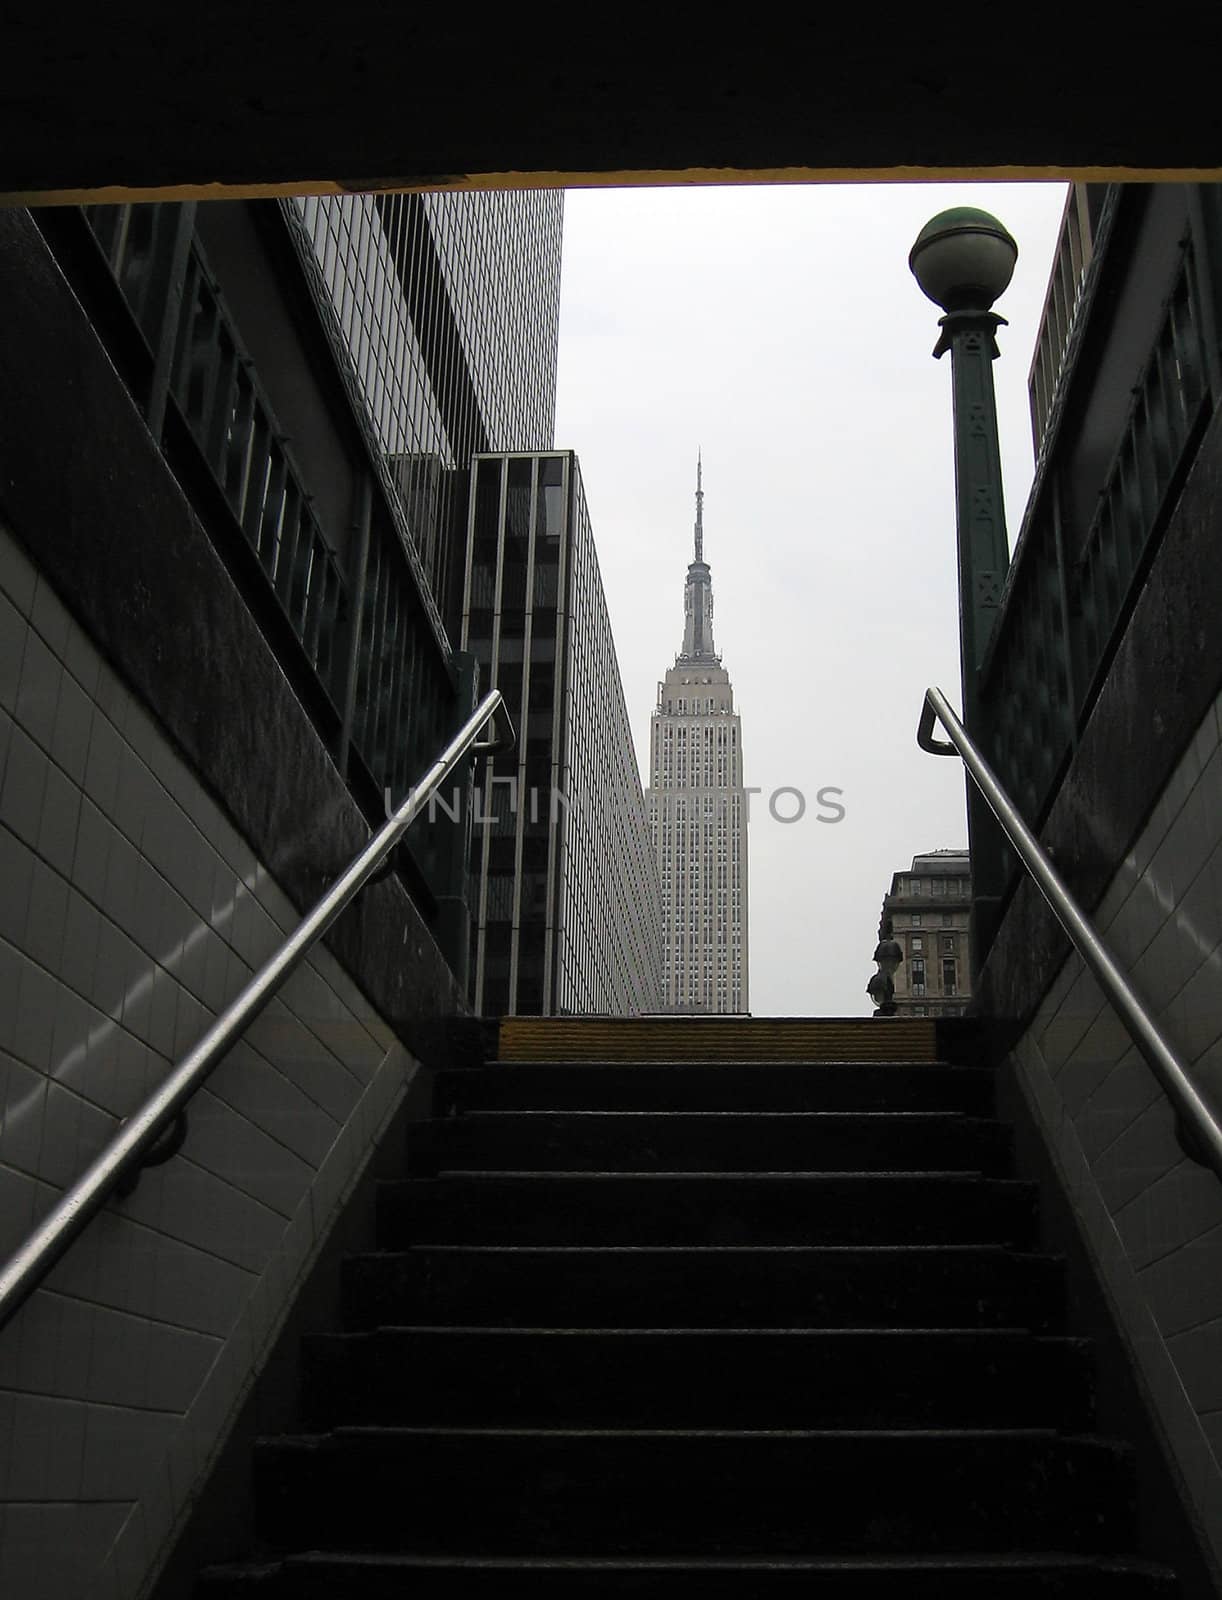 Empire State Building in New York, photo taken from metro station